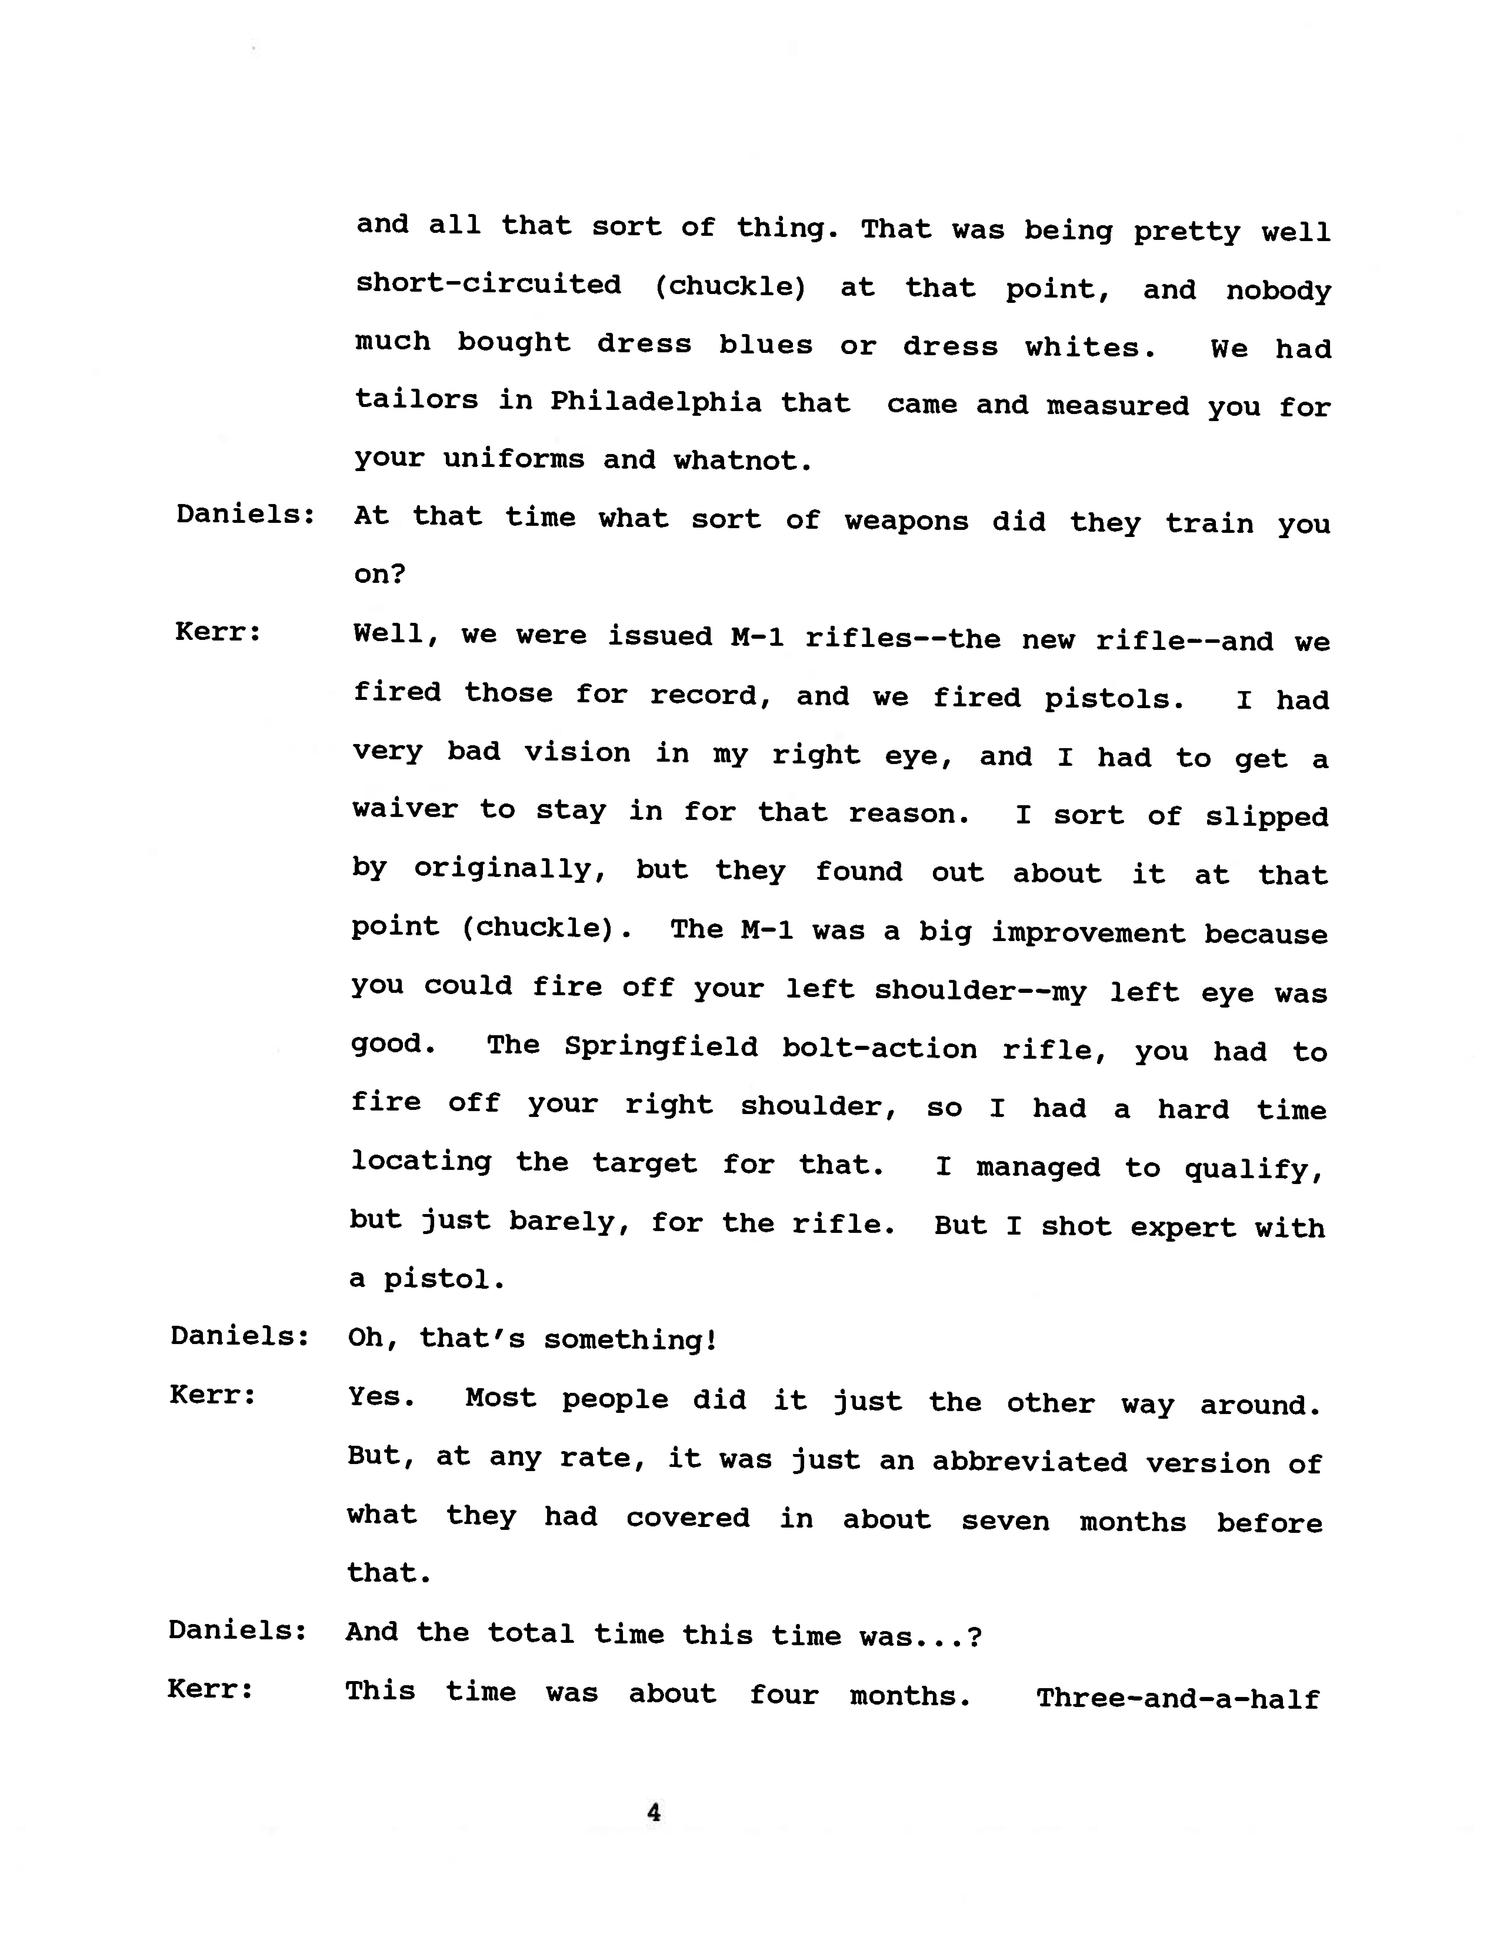 Oral History Interview with Baine Kerr, May 4, 1993
                                                
                                                    4
                                                